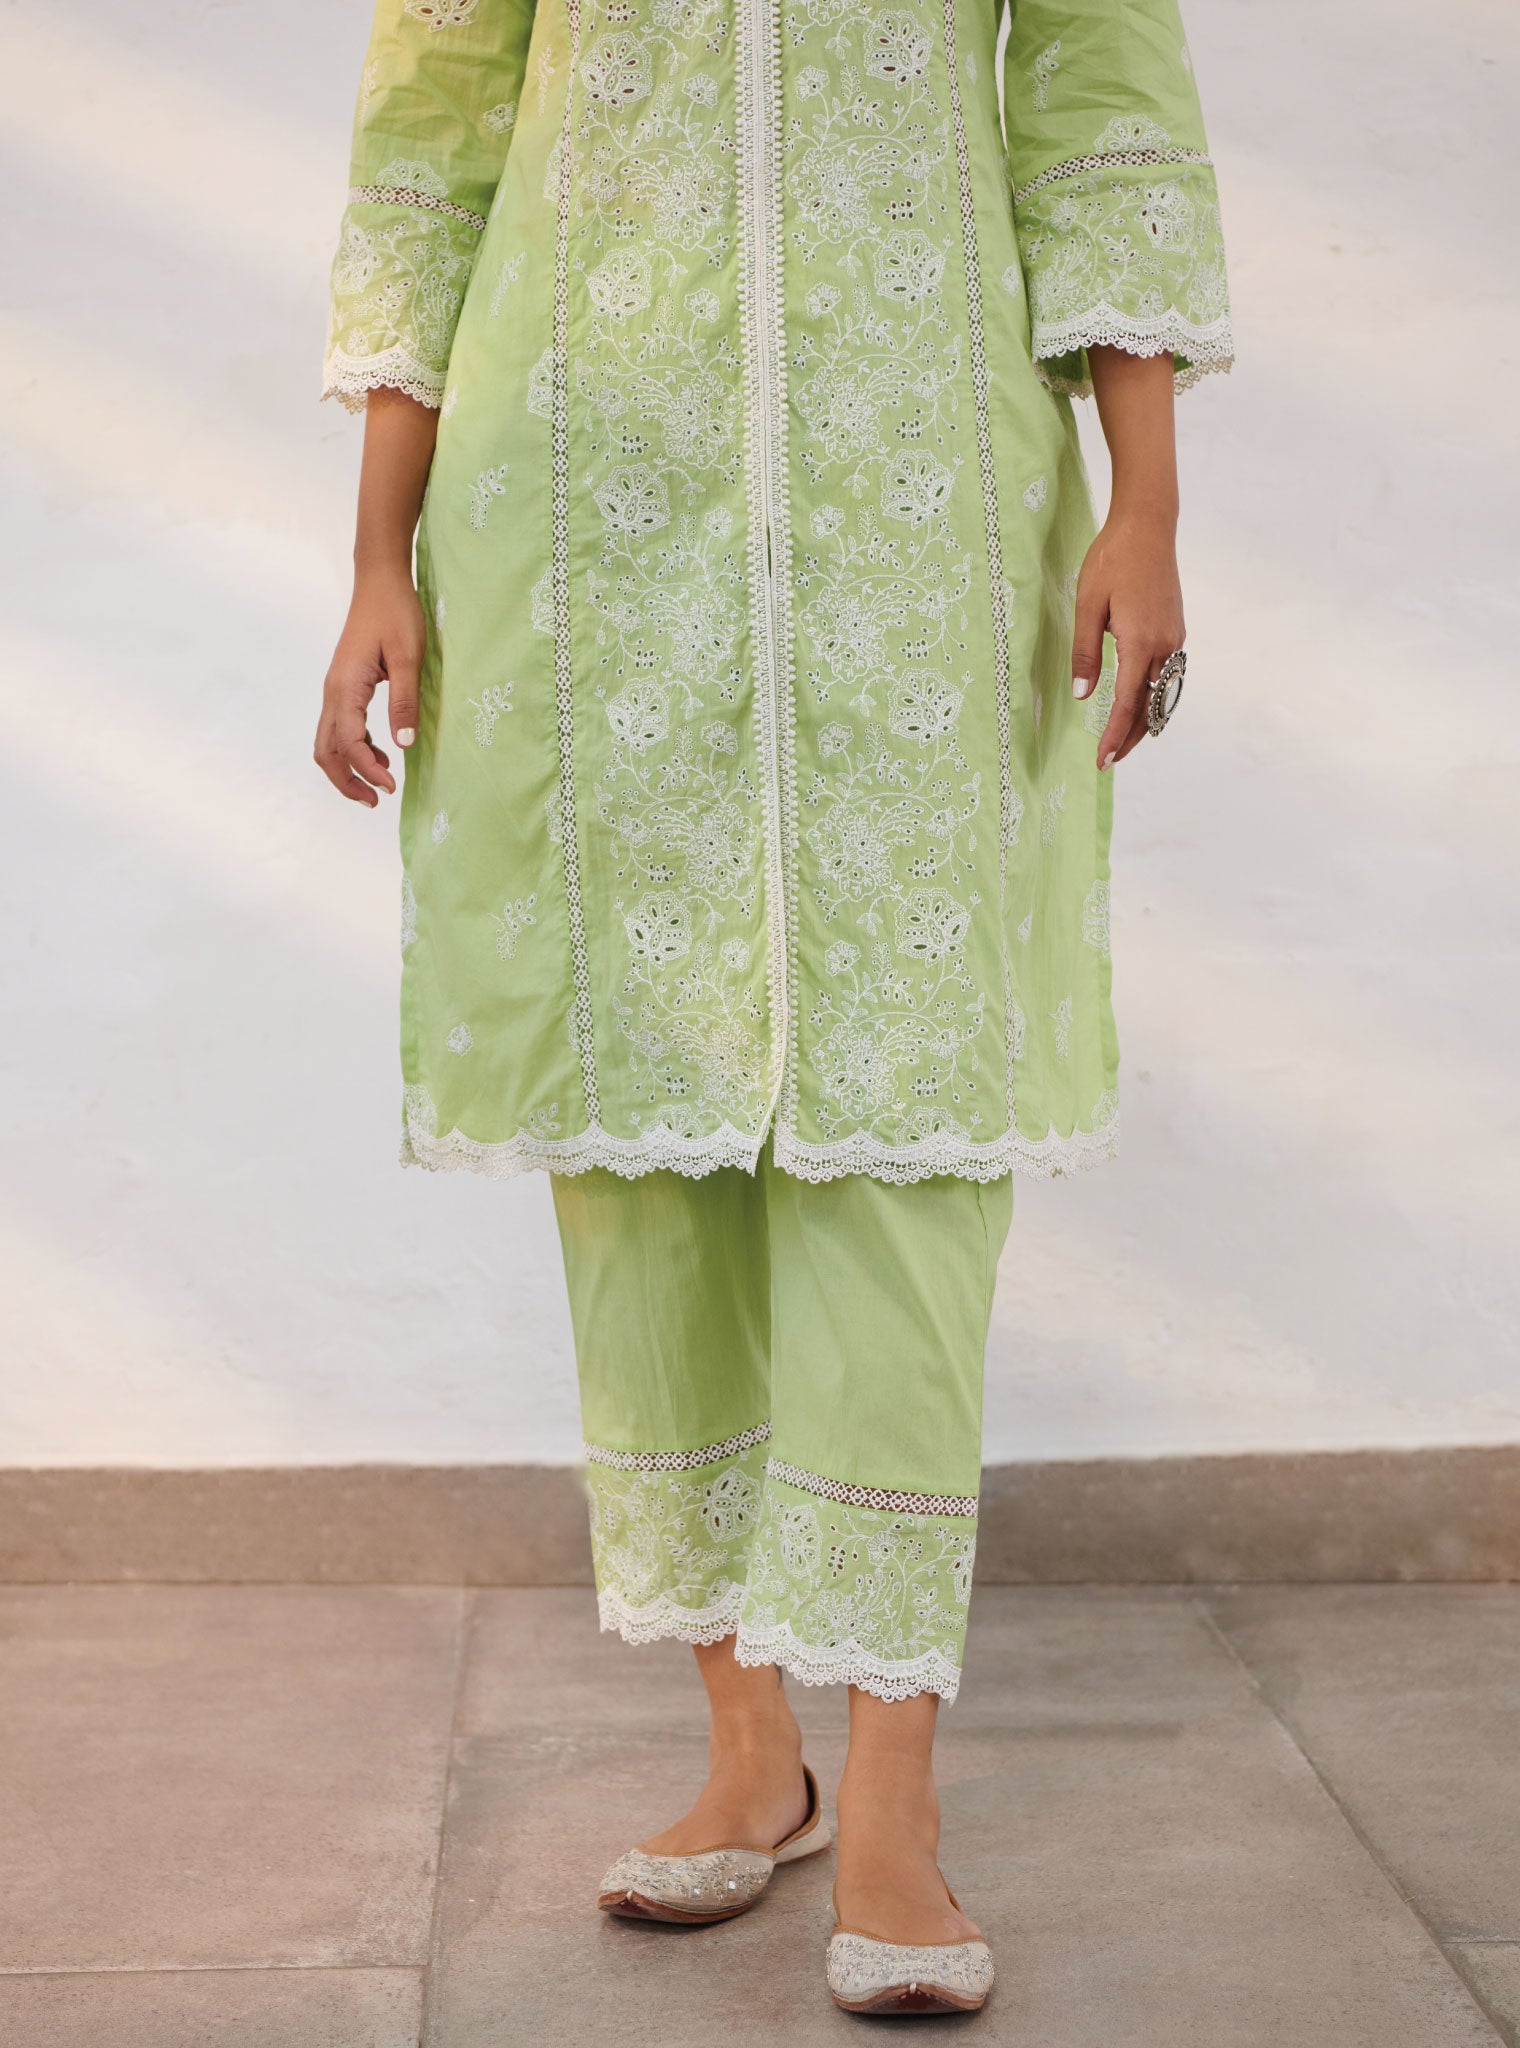 Mulmul Cotton Chester Green Kurta With Chester Green Pant